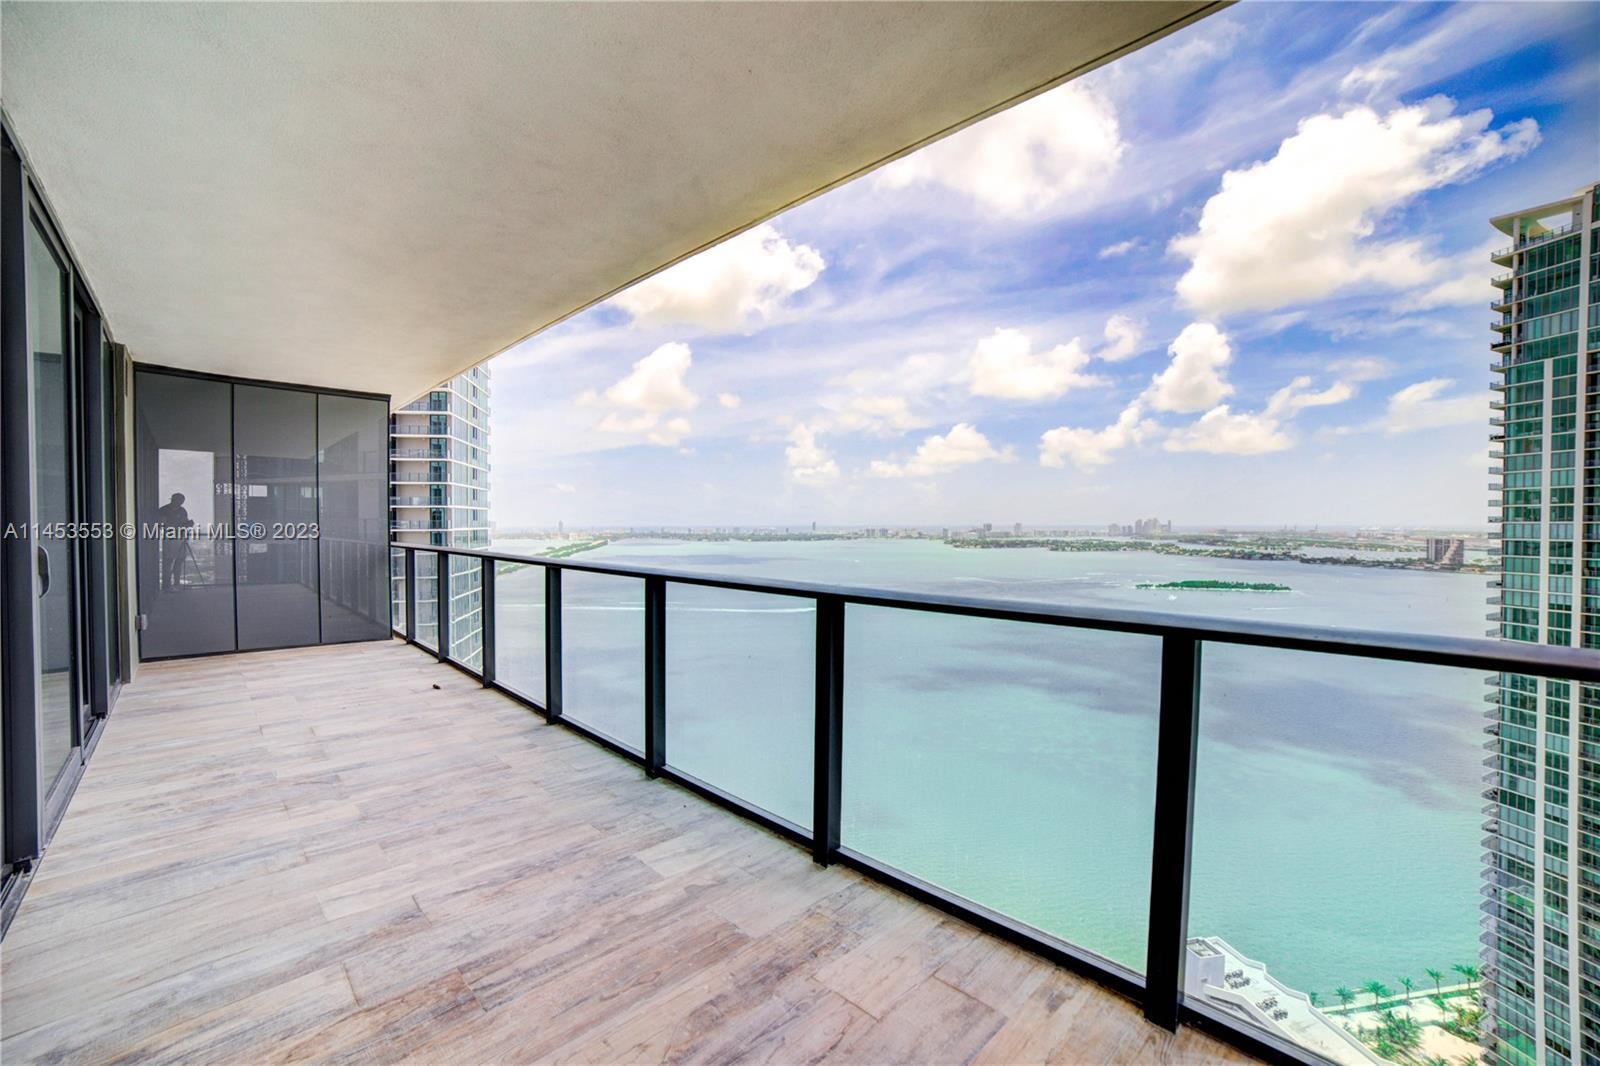 Located on the 40th floor, this stunning Corner 4 Bedroom/ 4 baths Skyvilla is a true gem With a pri